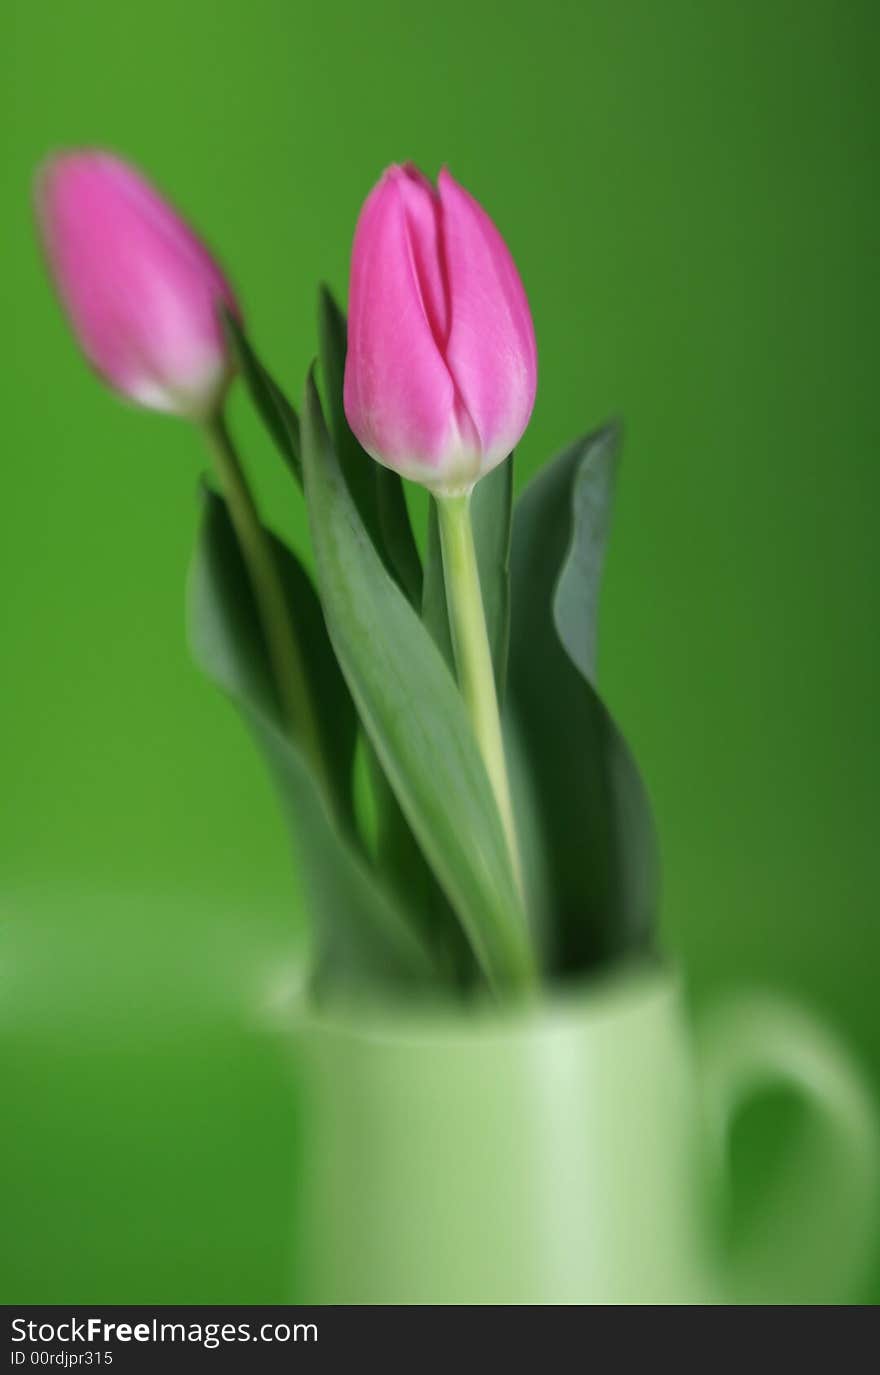 Pink tulips with soft focus and desaturated colors